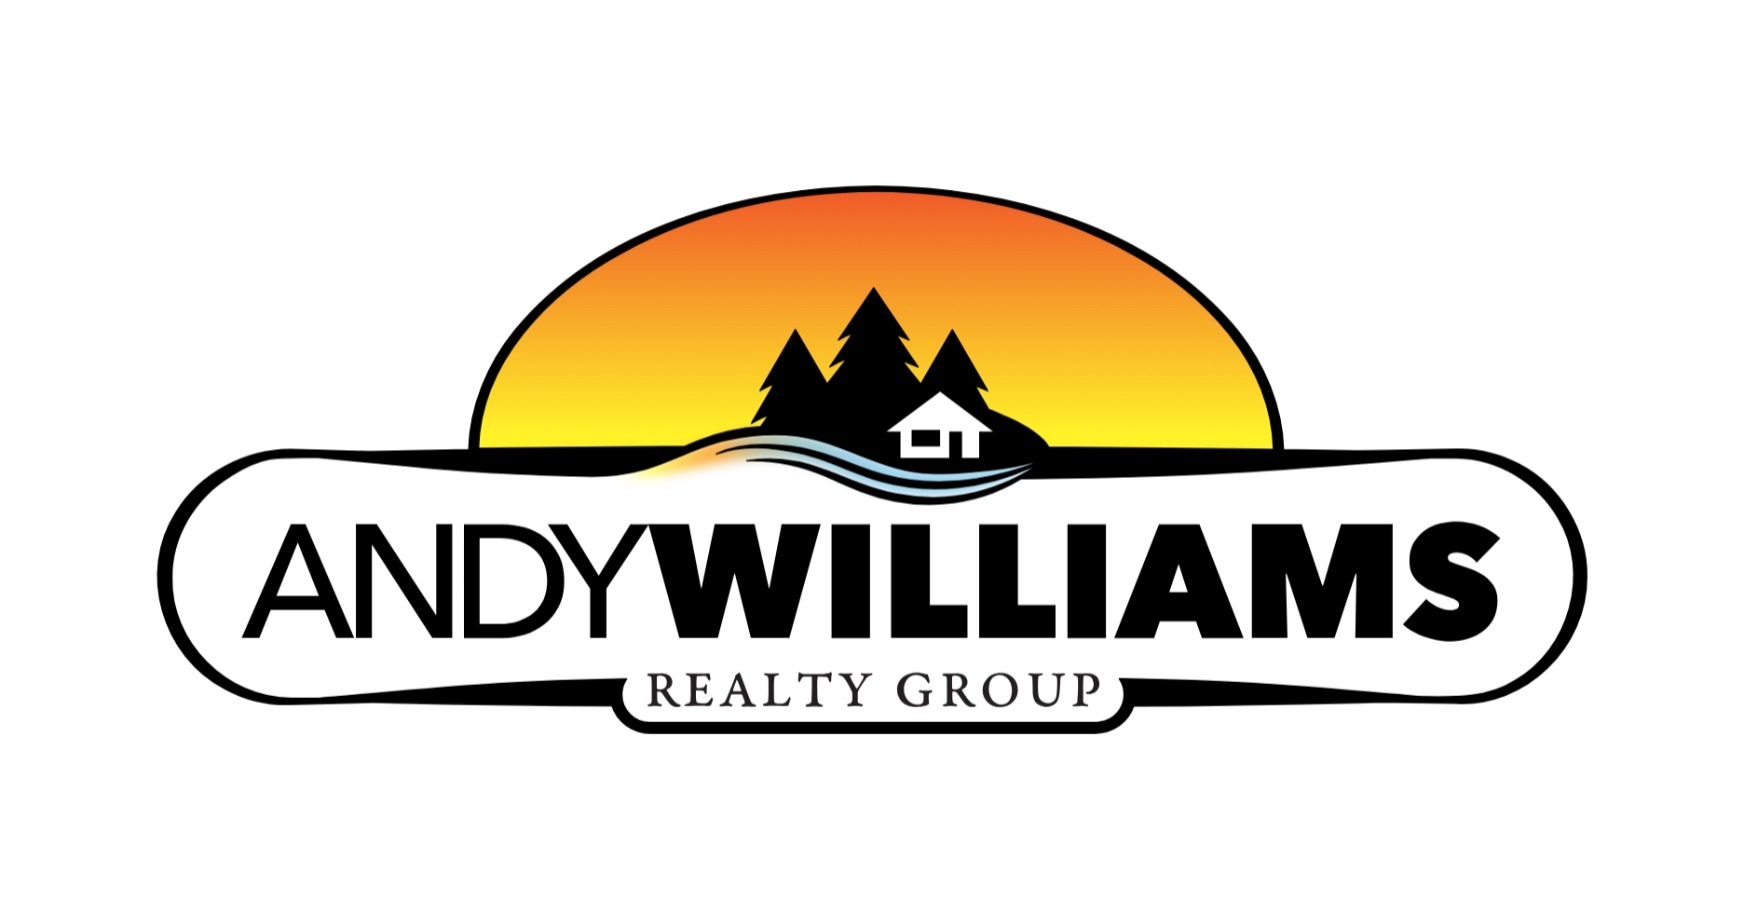 Andy Williams Realty